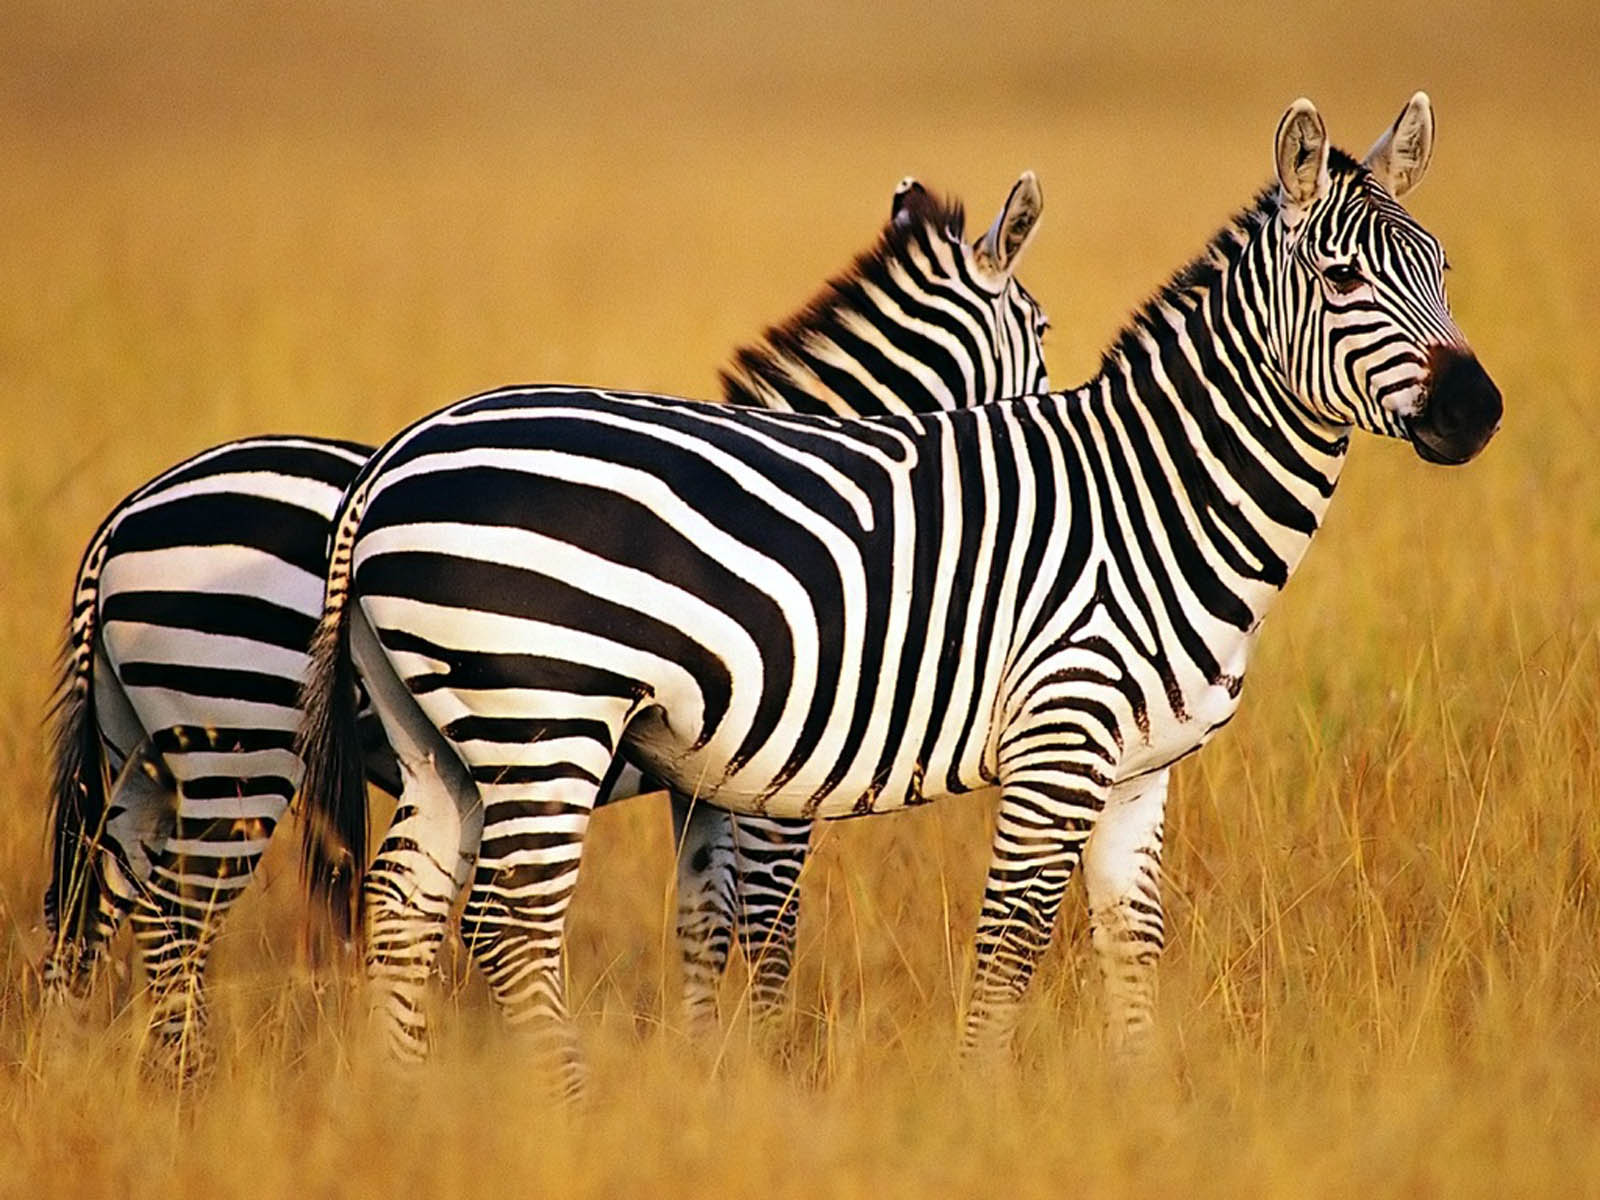 Zebra Wallpaper Background Photos Image And Pictures For